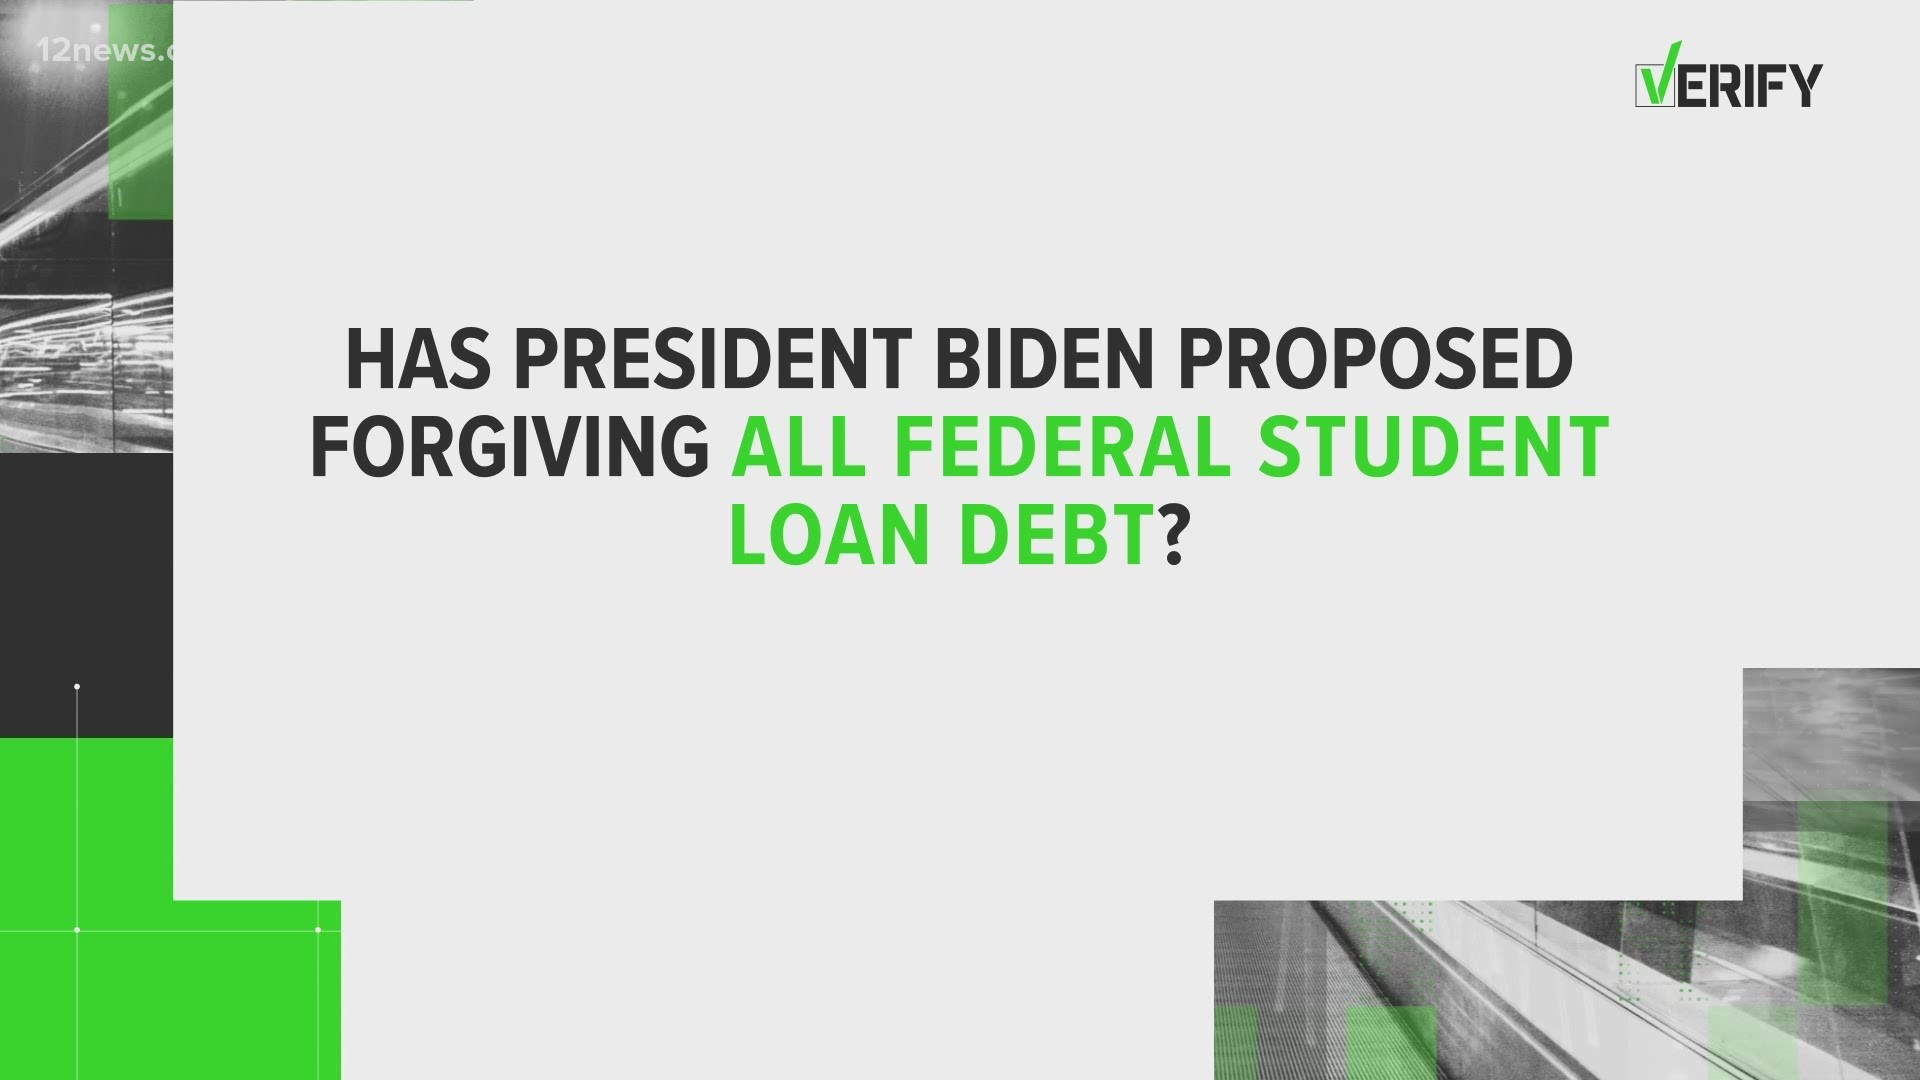 There's a lot of talk on social media about whether Biden might forgive student loans all together. The Verify Team looks into the rumors.